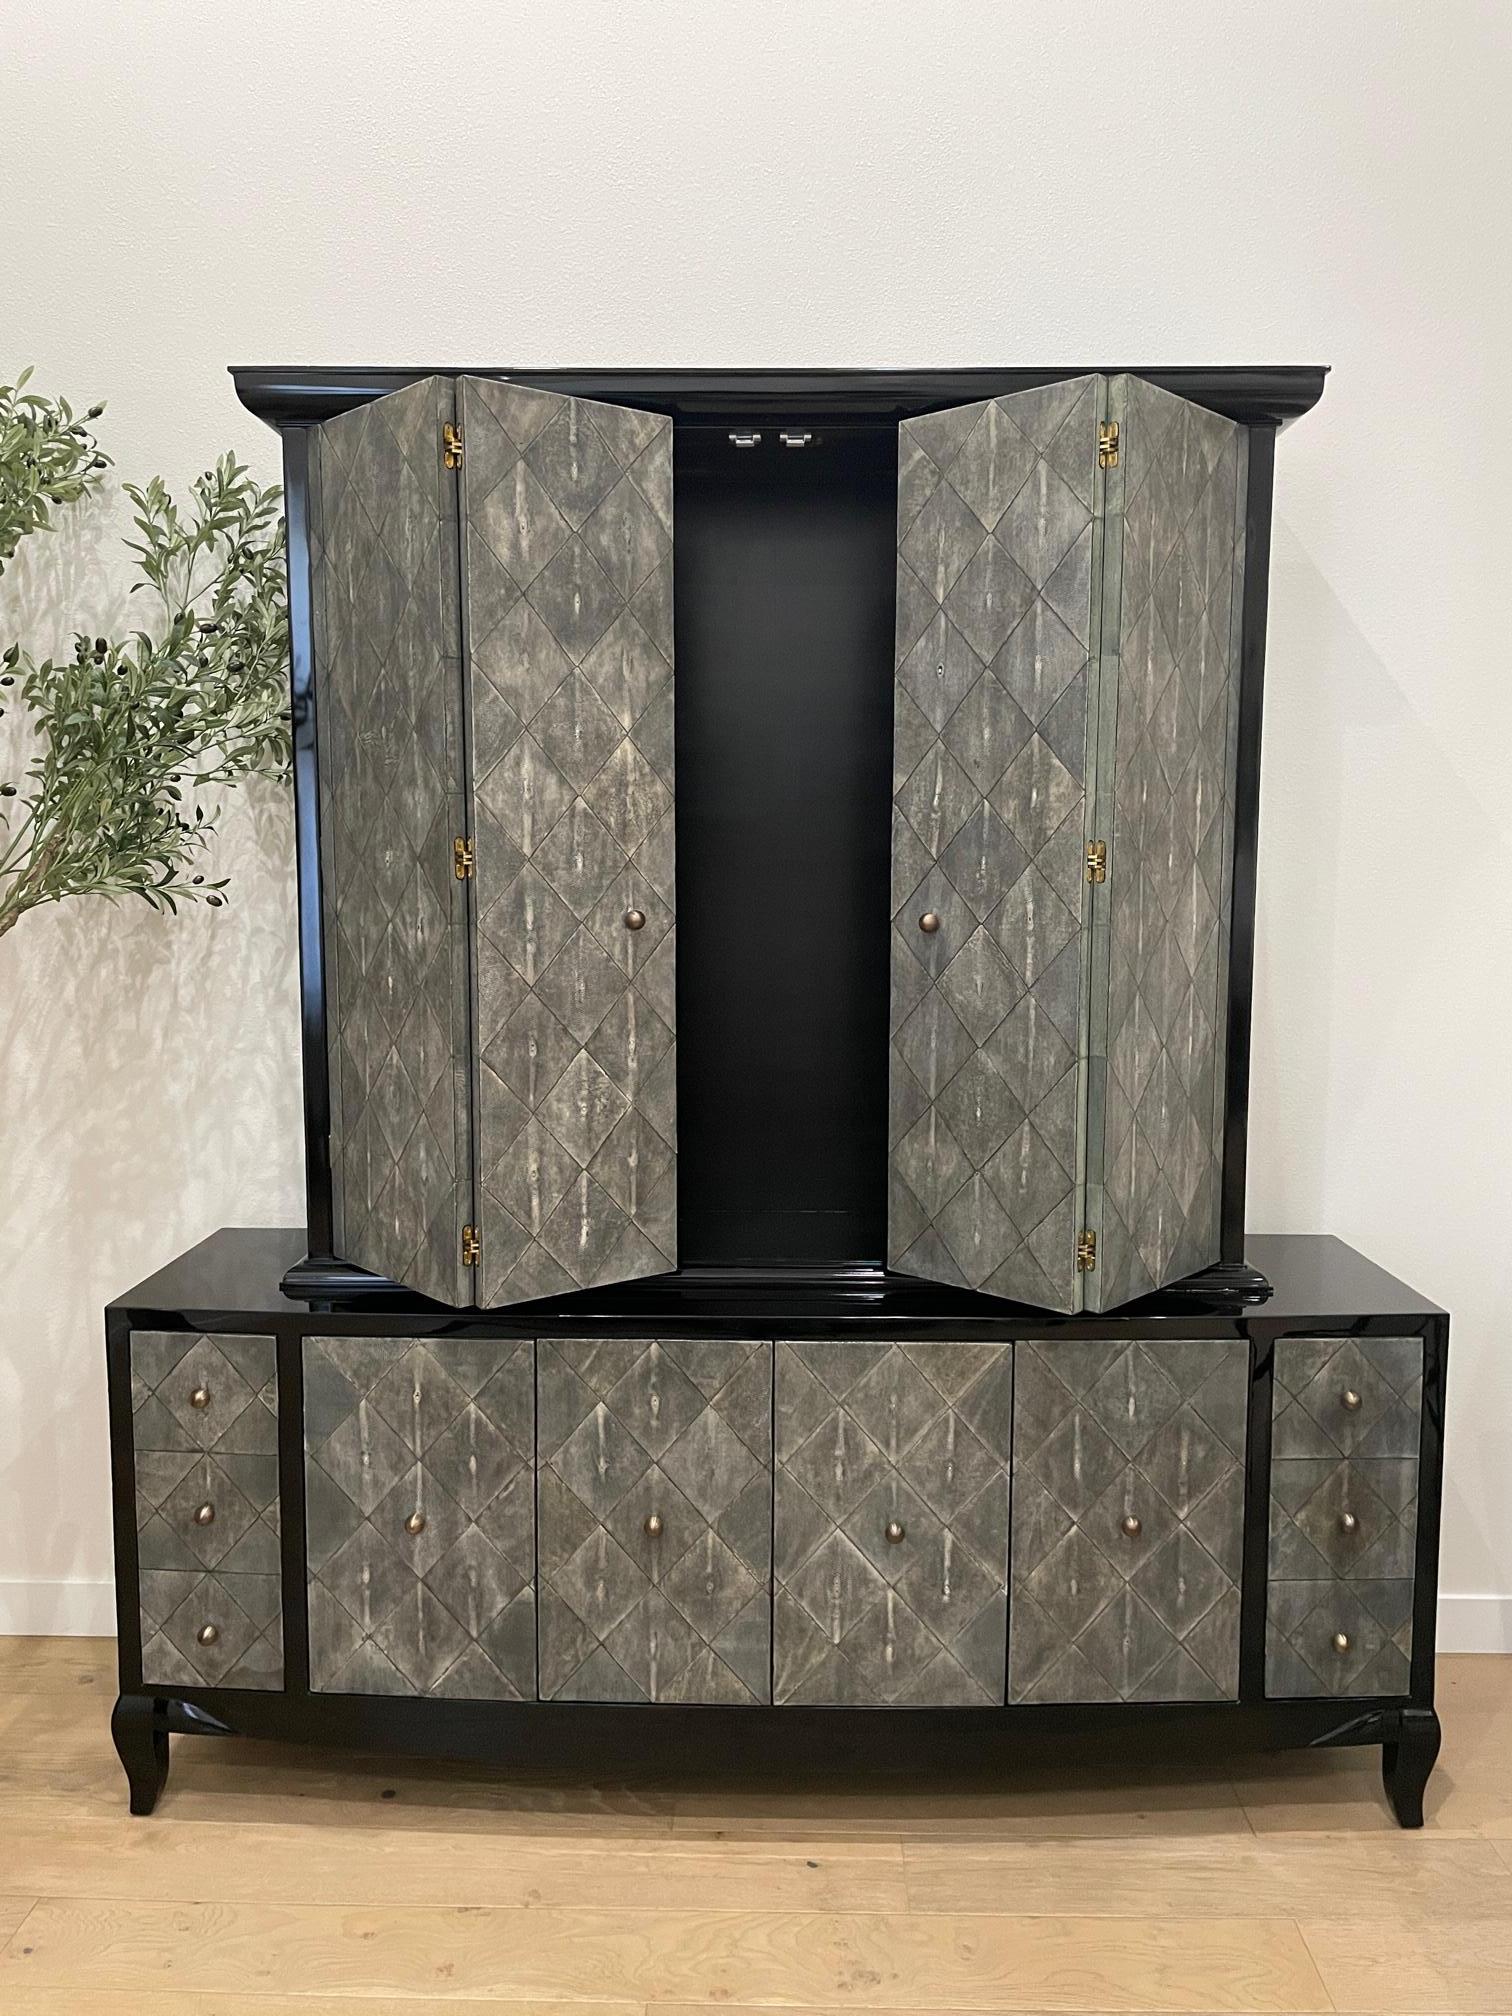 Jean de Merry's Viala cabinet is meant as an intimidating and impactful statement piece for a regal dining room or living room setting.  Standing over seven and a half feet tall, the dark and moody piece shimmers with its hand-laid Ebony French